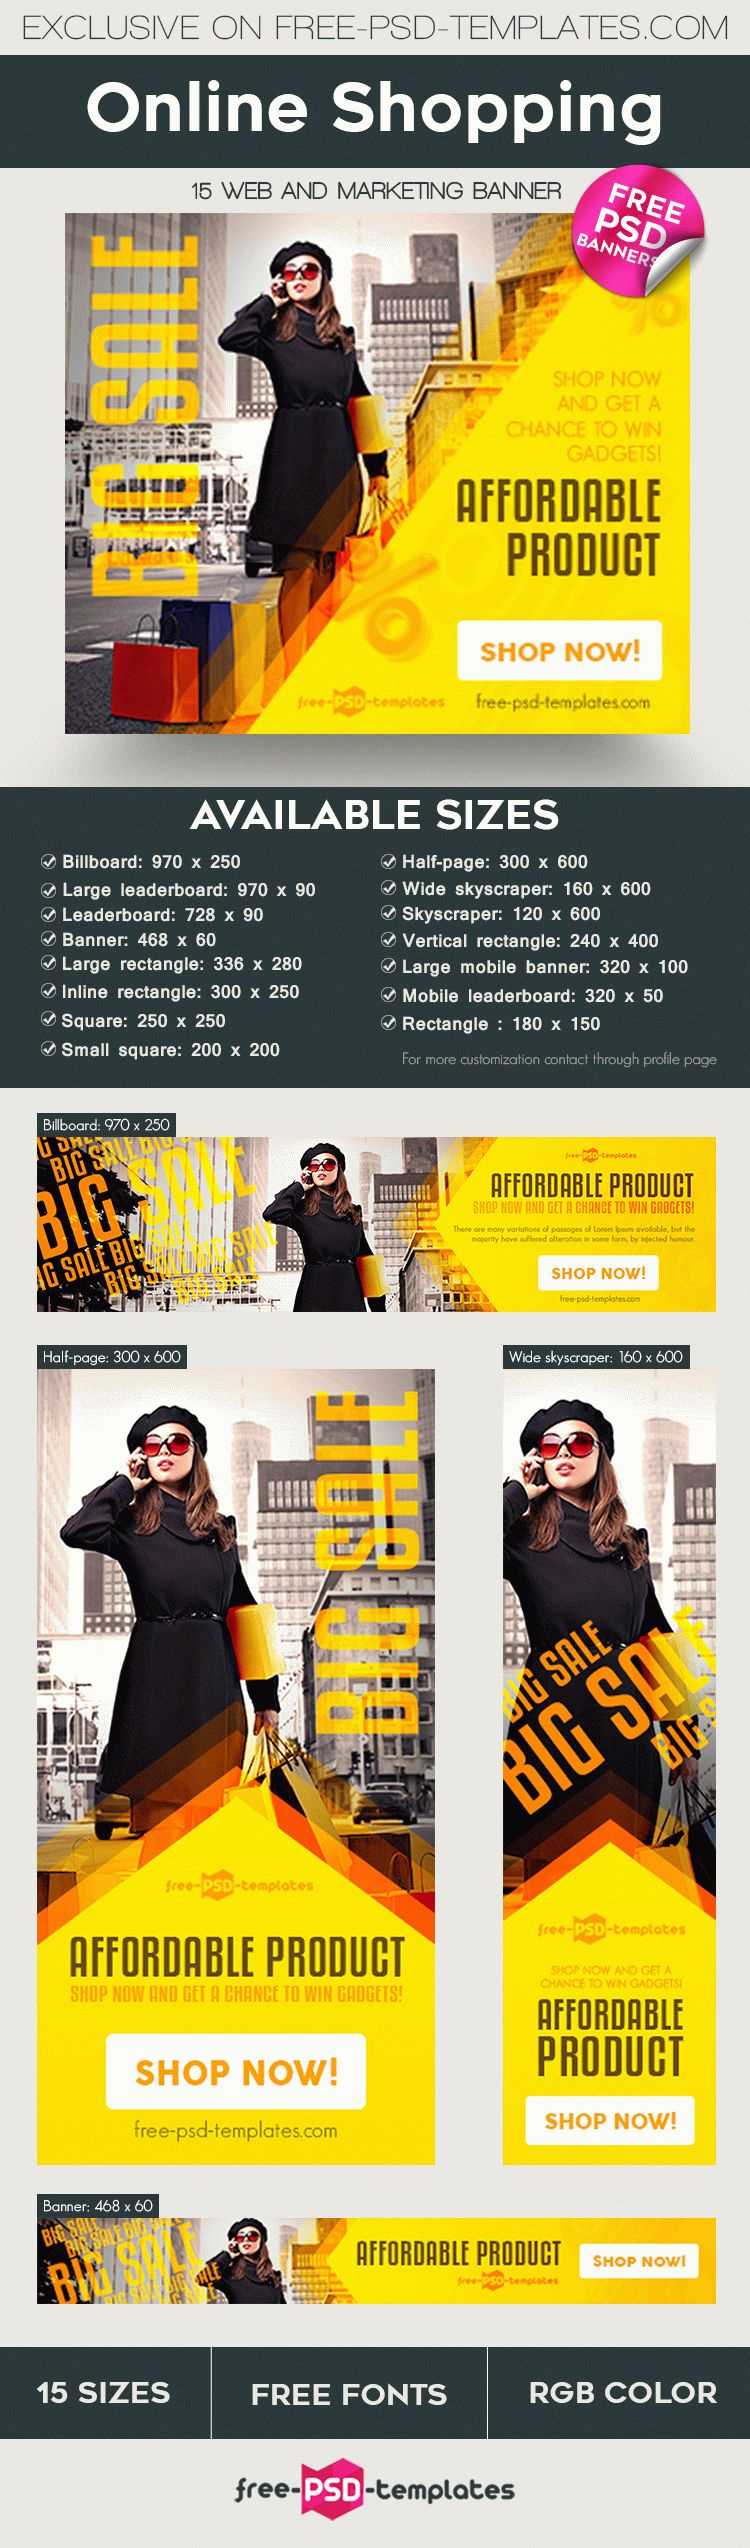 15 Free Online Shopping Banner In Psd | Free Psd Templates Within Free Online Banner Templates